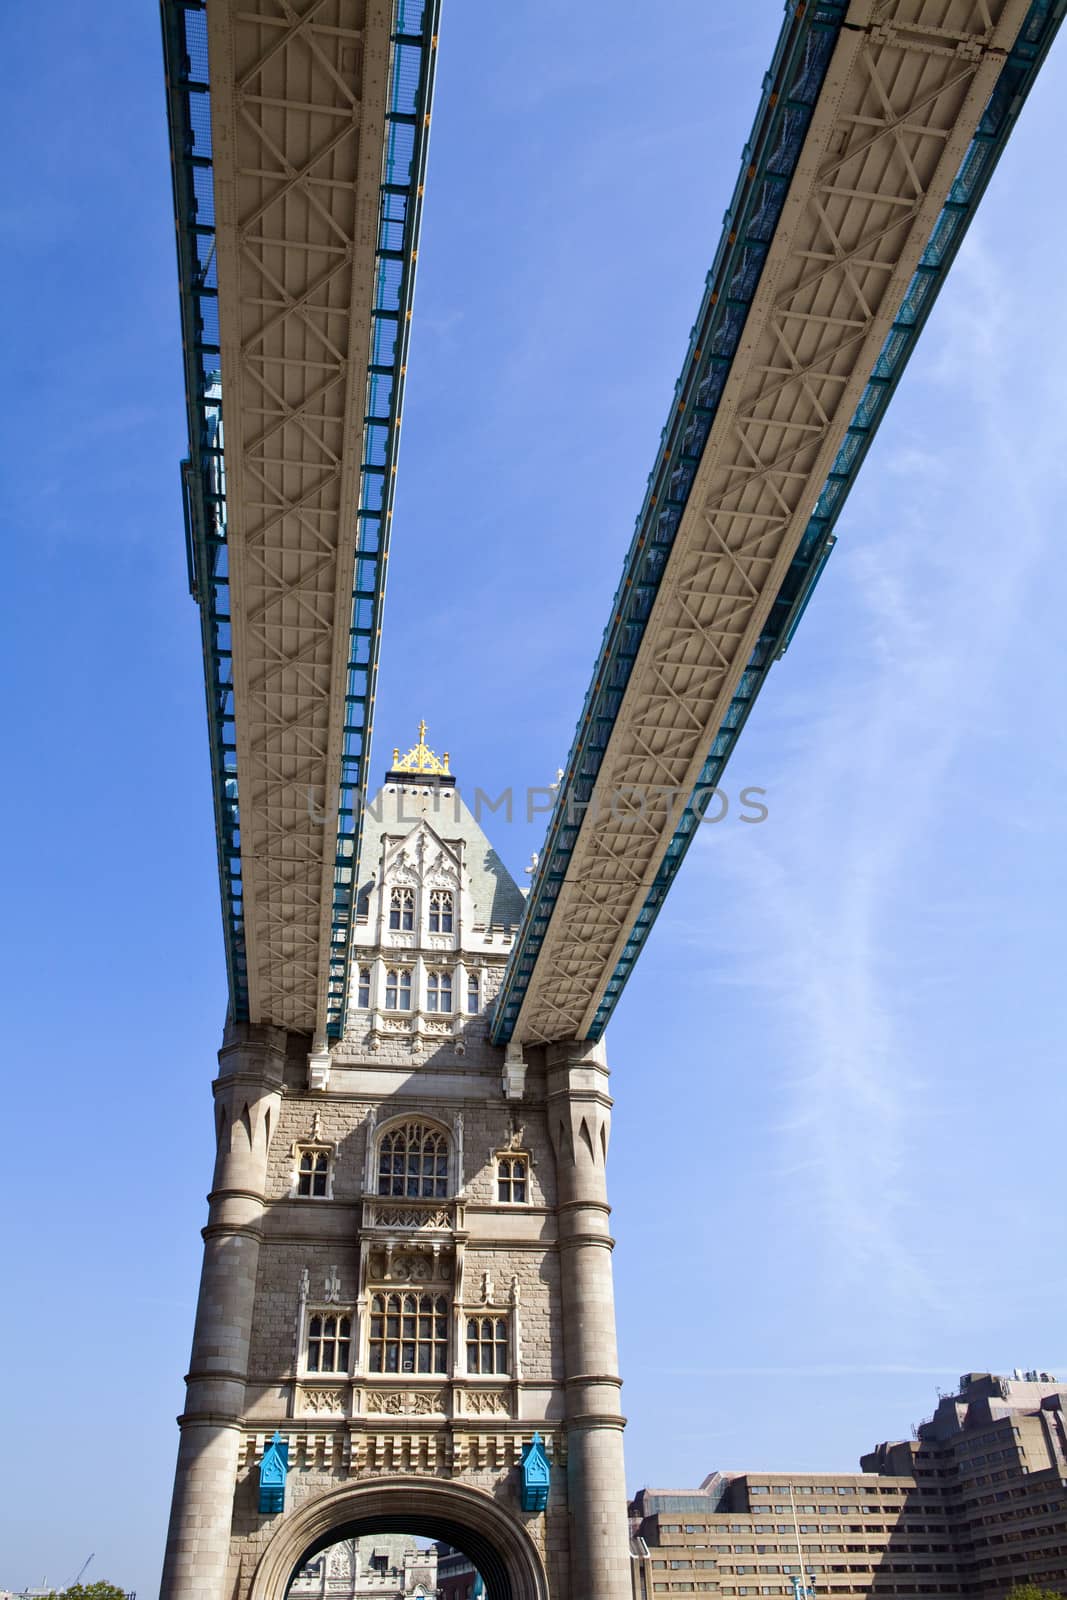 The magnificent architecture of Tower Bridge in London.